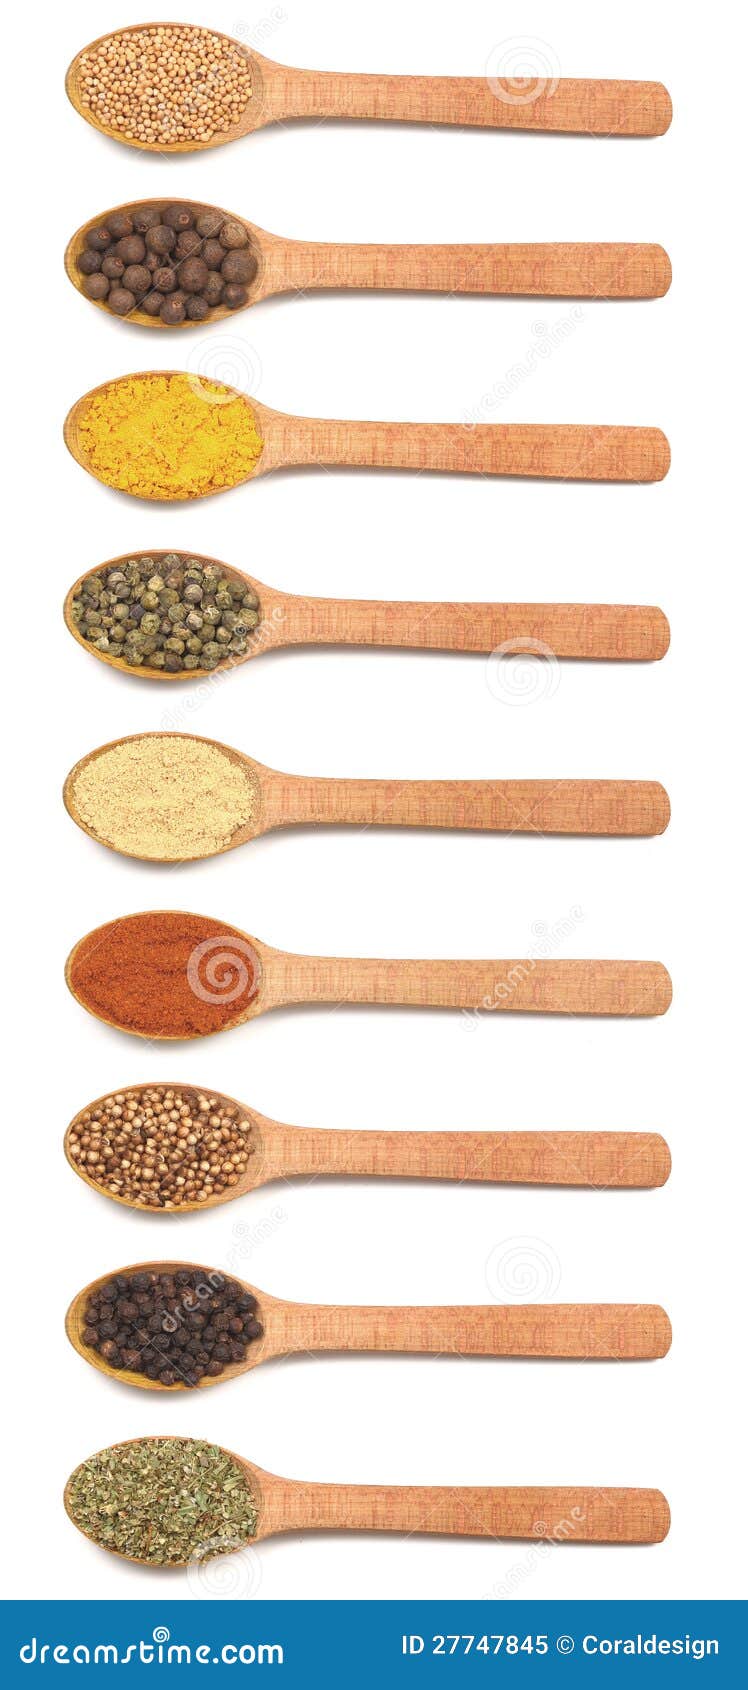 https://thumbs.dreamstime.com/z/collection-spices-wooden-spoons-27747845.jpg